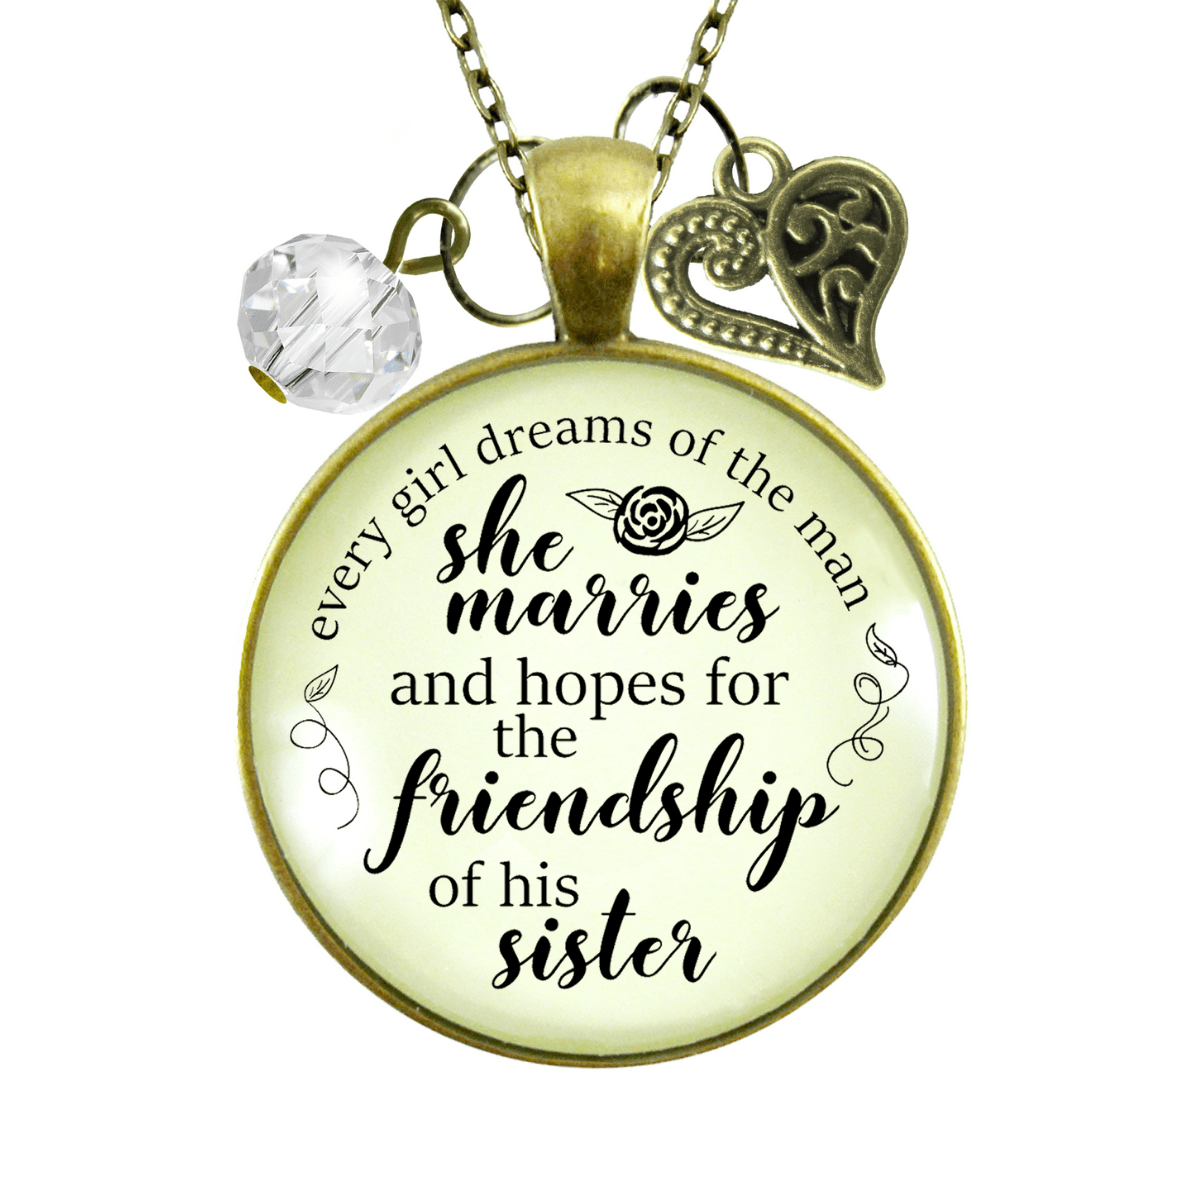 Gutsy Goodness Sister-In-Law Necklace Dreams New Sister Wedding Day Gift from Bride - Gutsy Goodness;Sister-In-Law Necklace Dreams New Sister Wedding Day Gift From Bride - Gutsy Goodness Handmade Jewelry Gifts